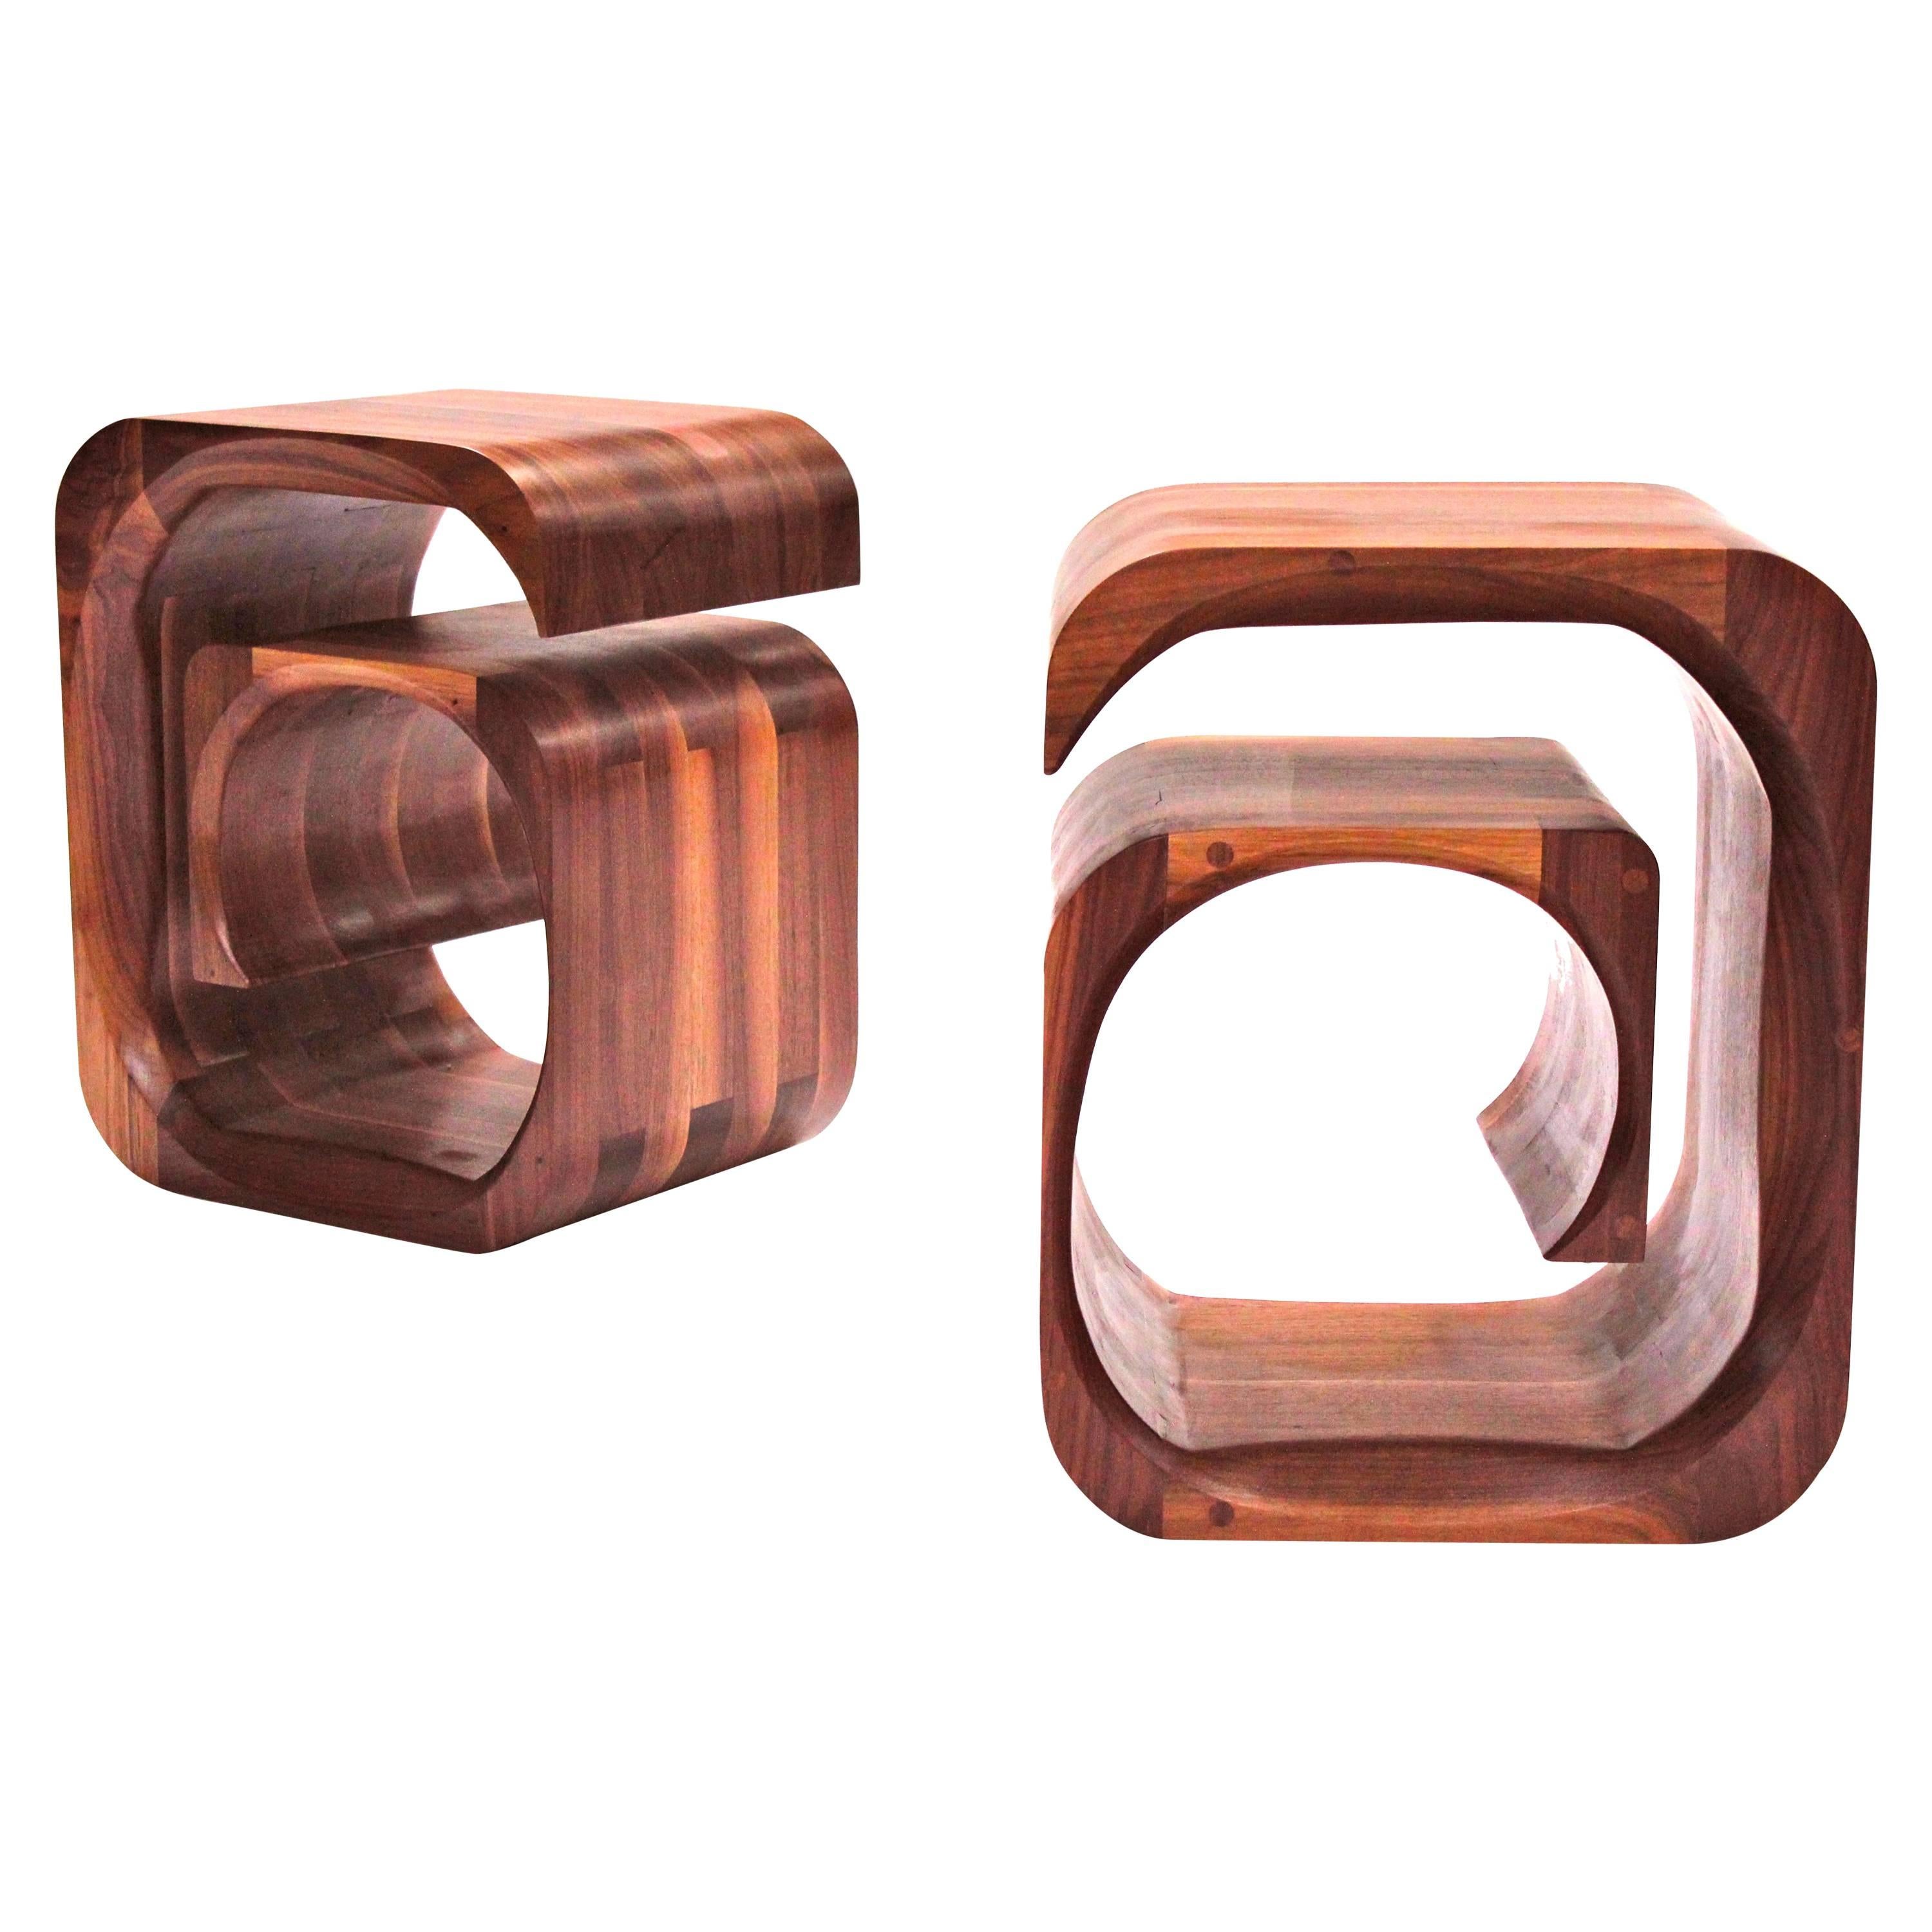 A pair of sculptural bedside Tables in solid walnut by Jonathan Field